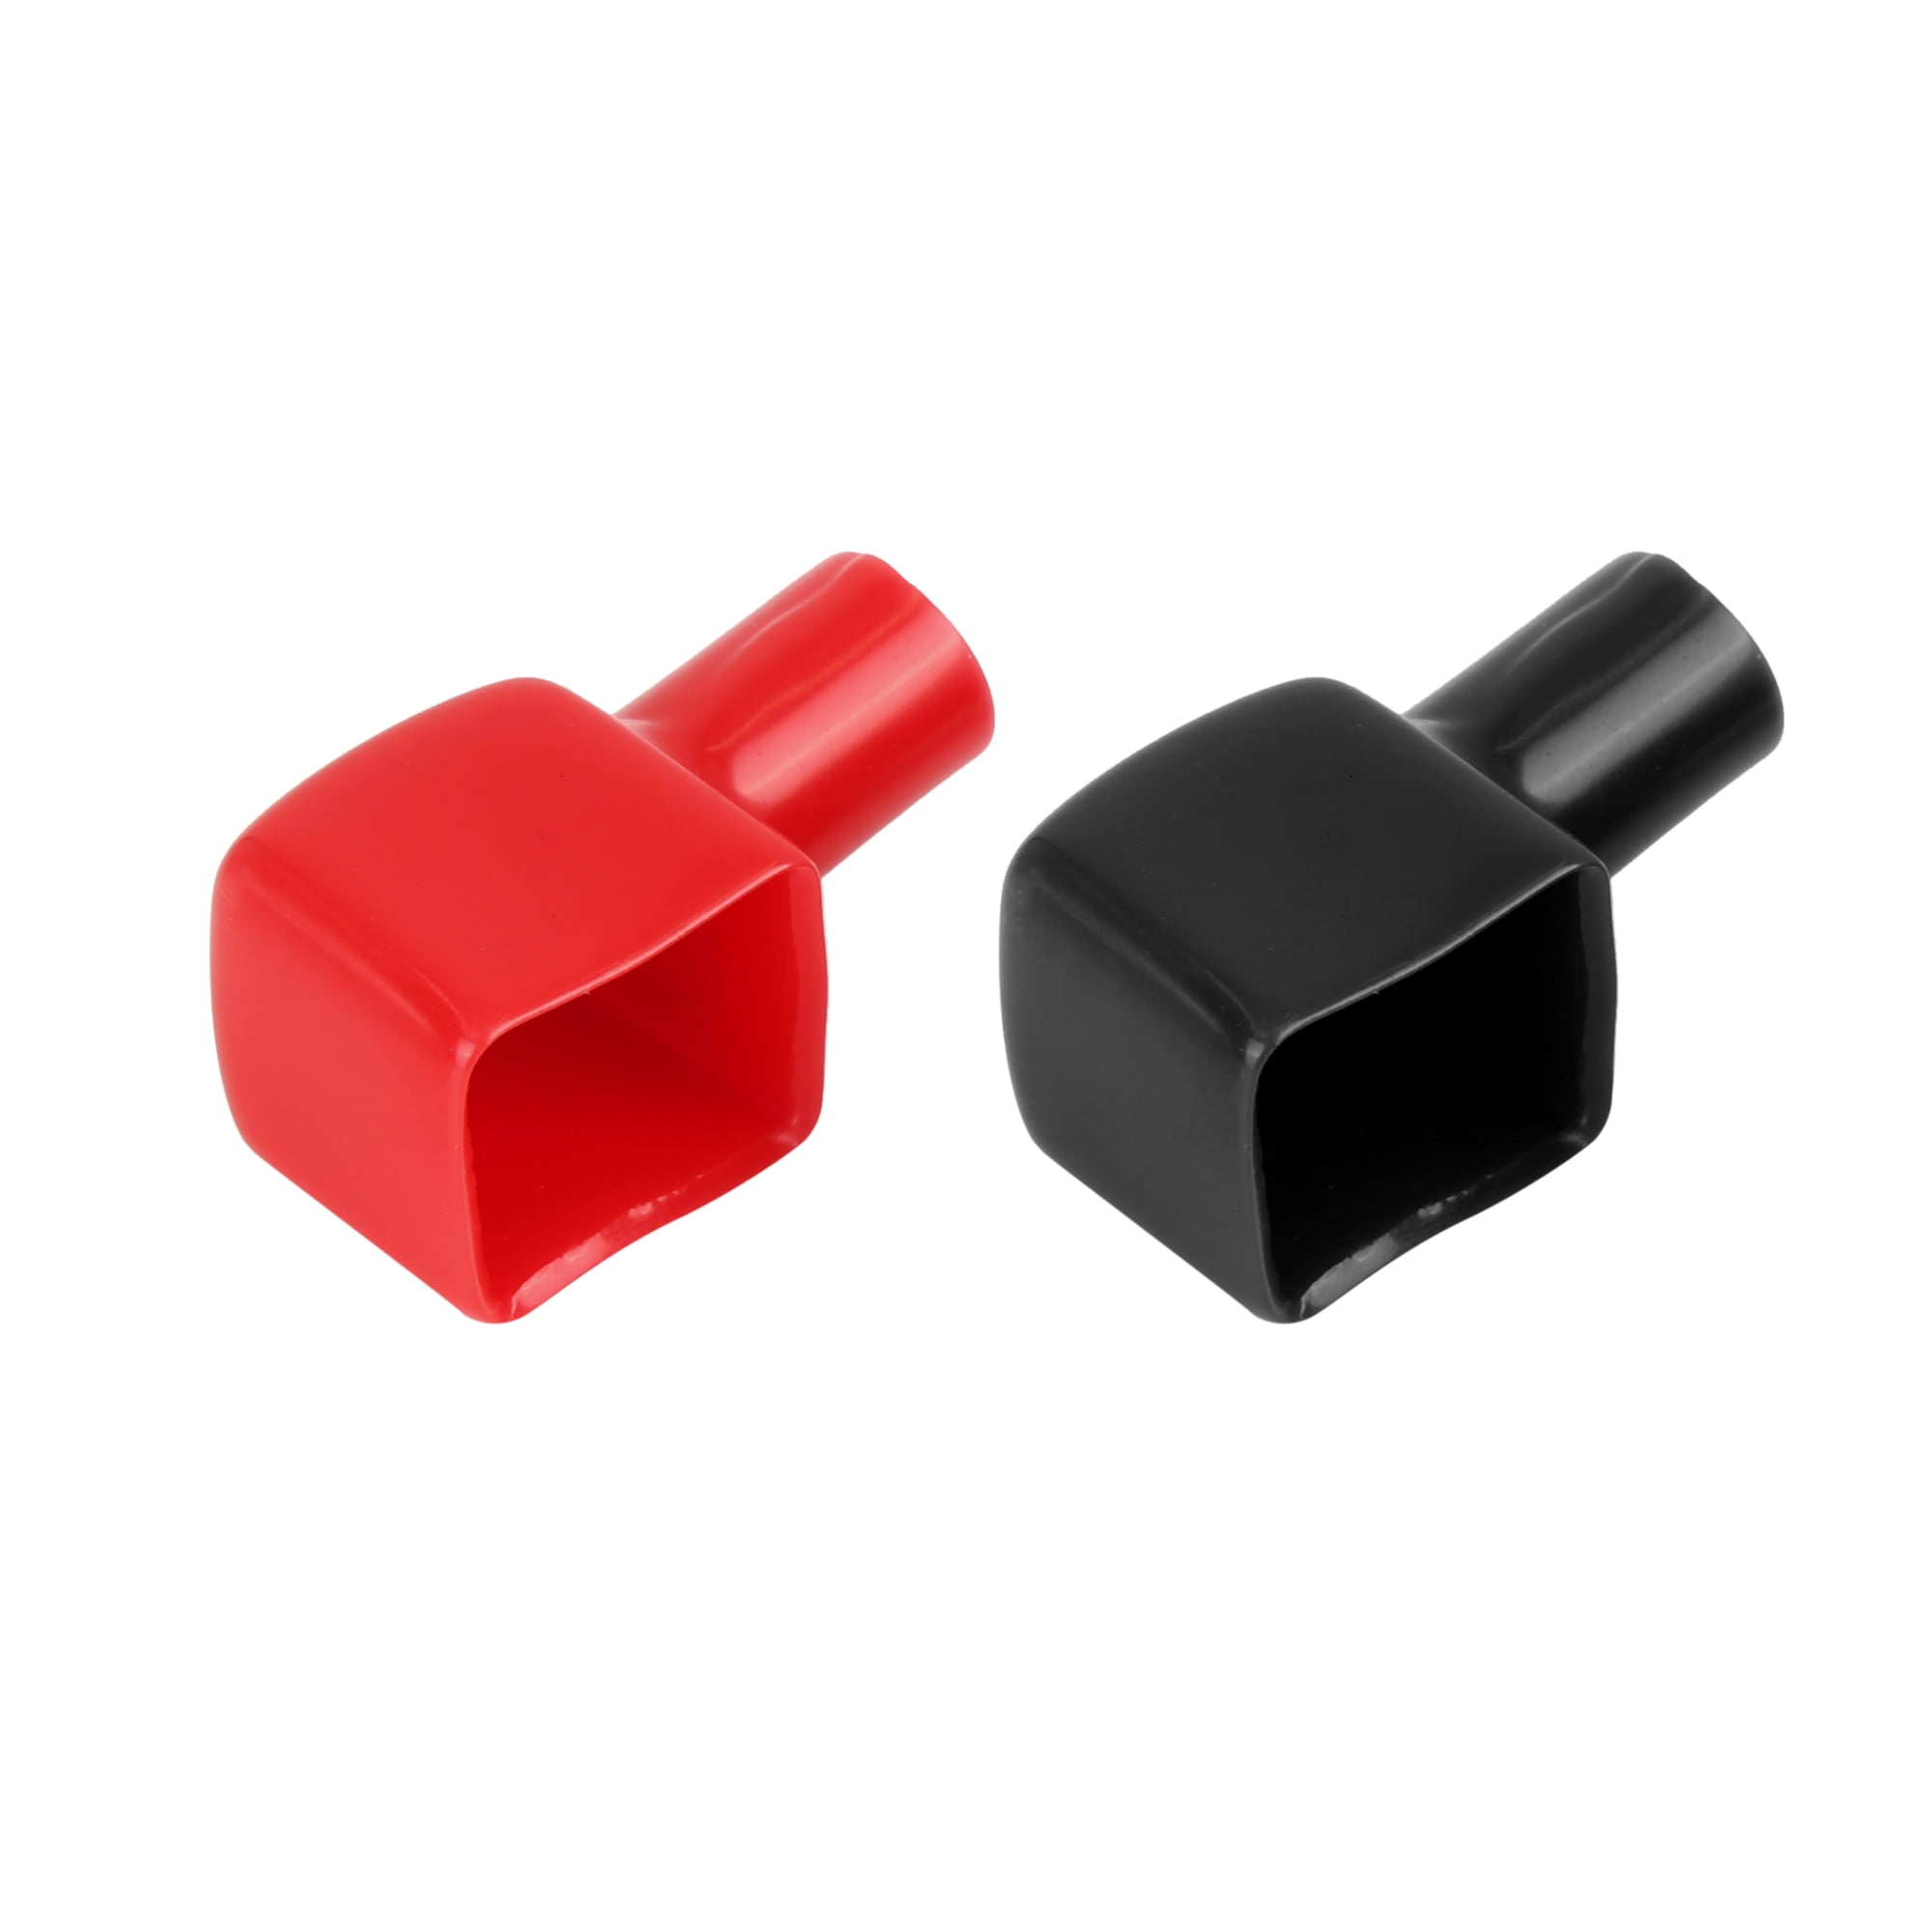 Quality Battery Clamp Terminal Stud Covers Positive Negative Red Black Insulated 